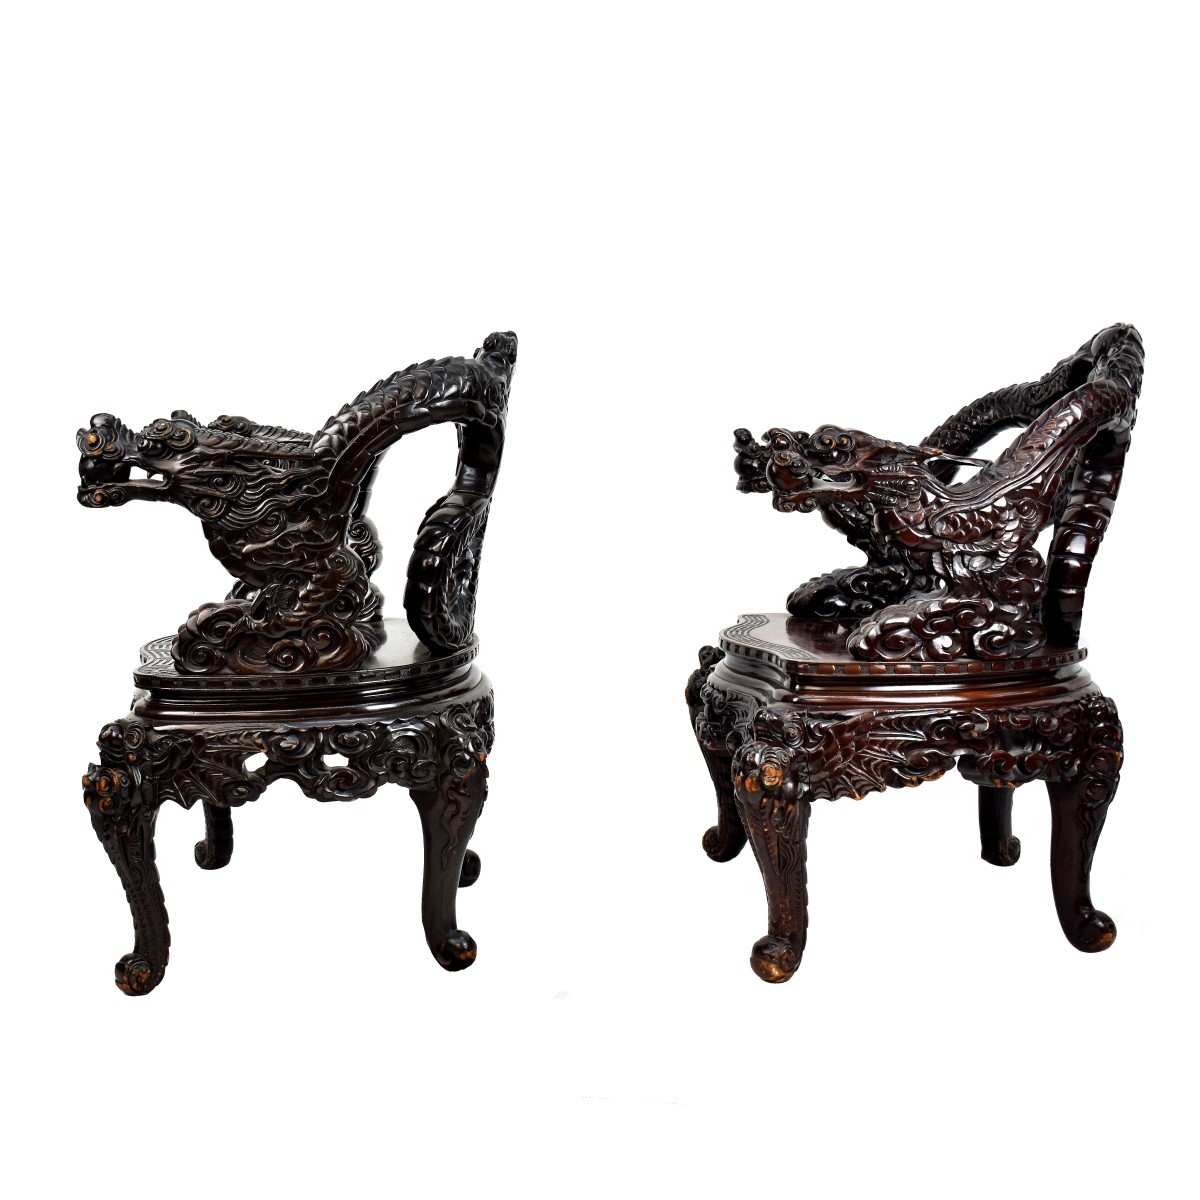 Pair of Chinese Dragon Chairs